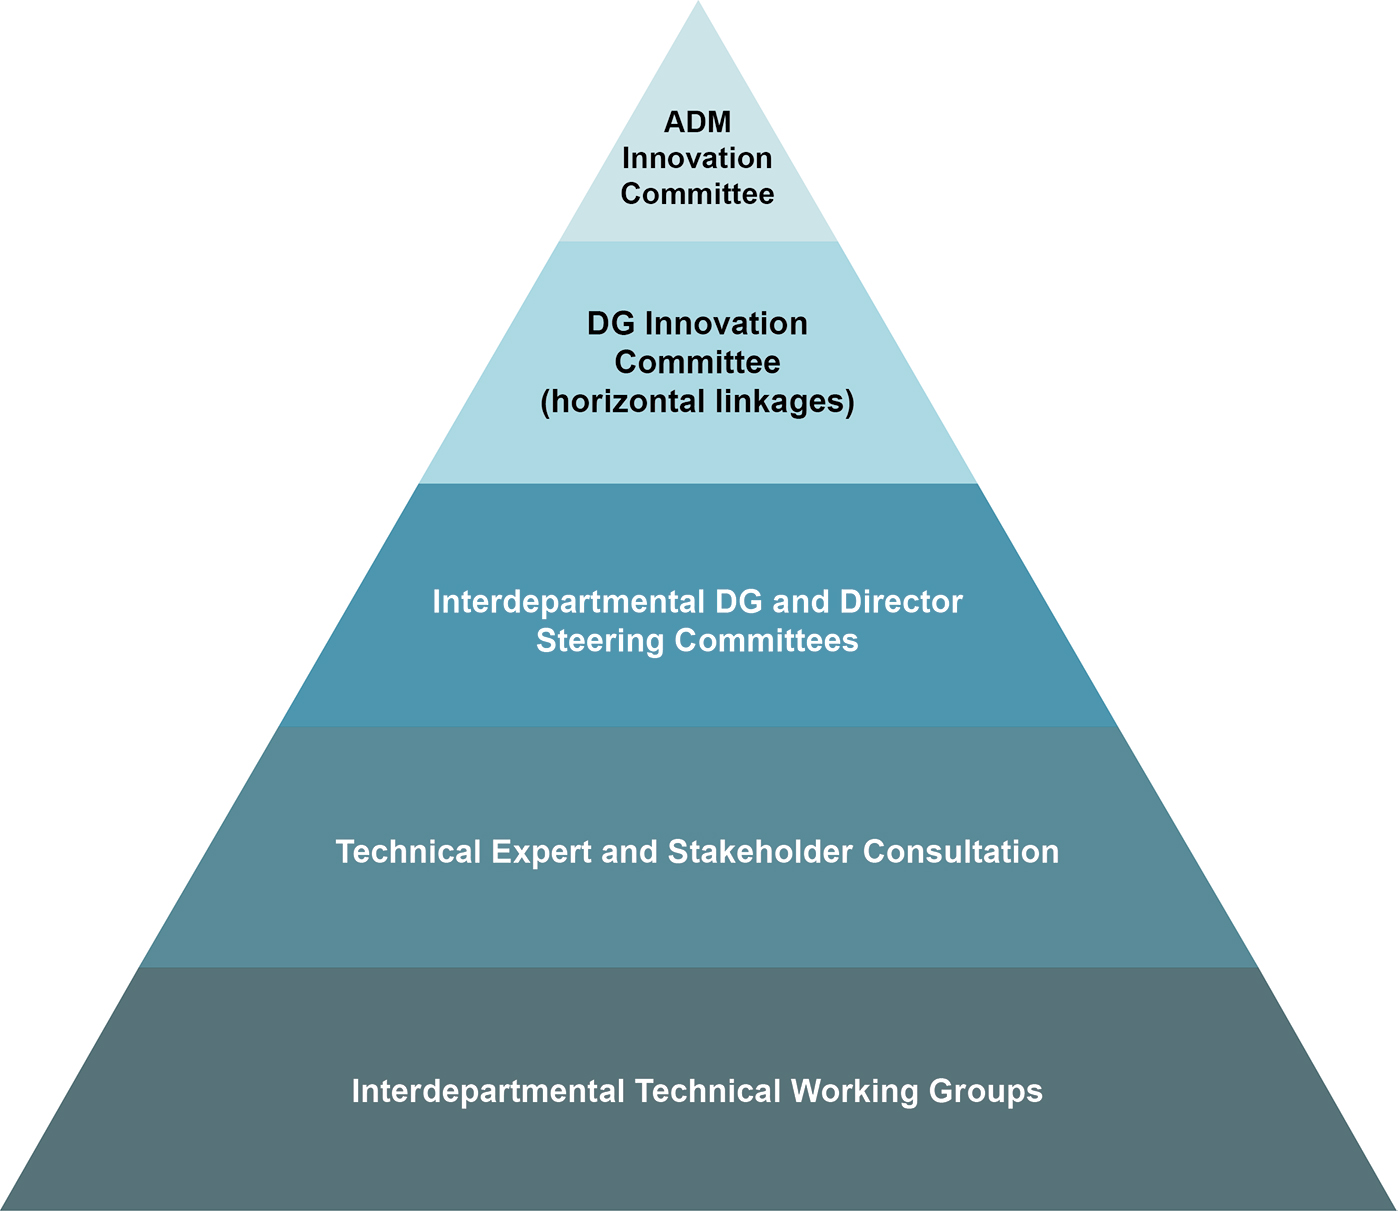 Pyramid structure of RD&D governance at TC. From top to bottom, the governance structures include: ADM Innovation Committee, DG Innovation Committee, Interdepartmental DG and Director Committees, Technical Experts and Stakeholder Consultation, and Interdepartmental Technical Working Groups.